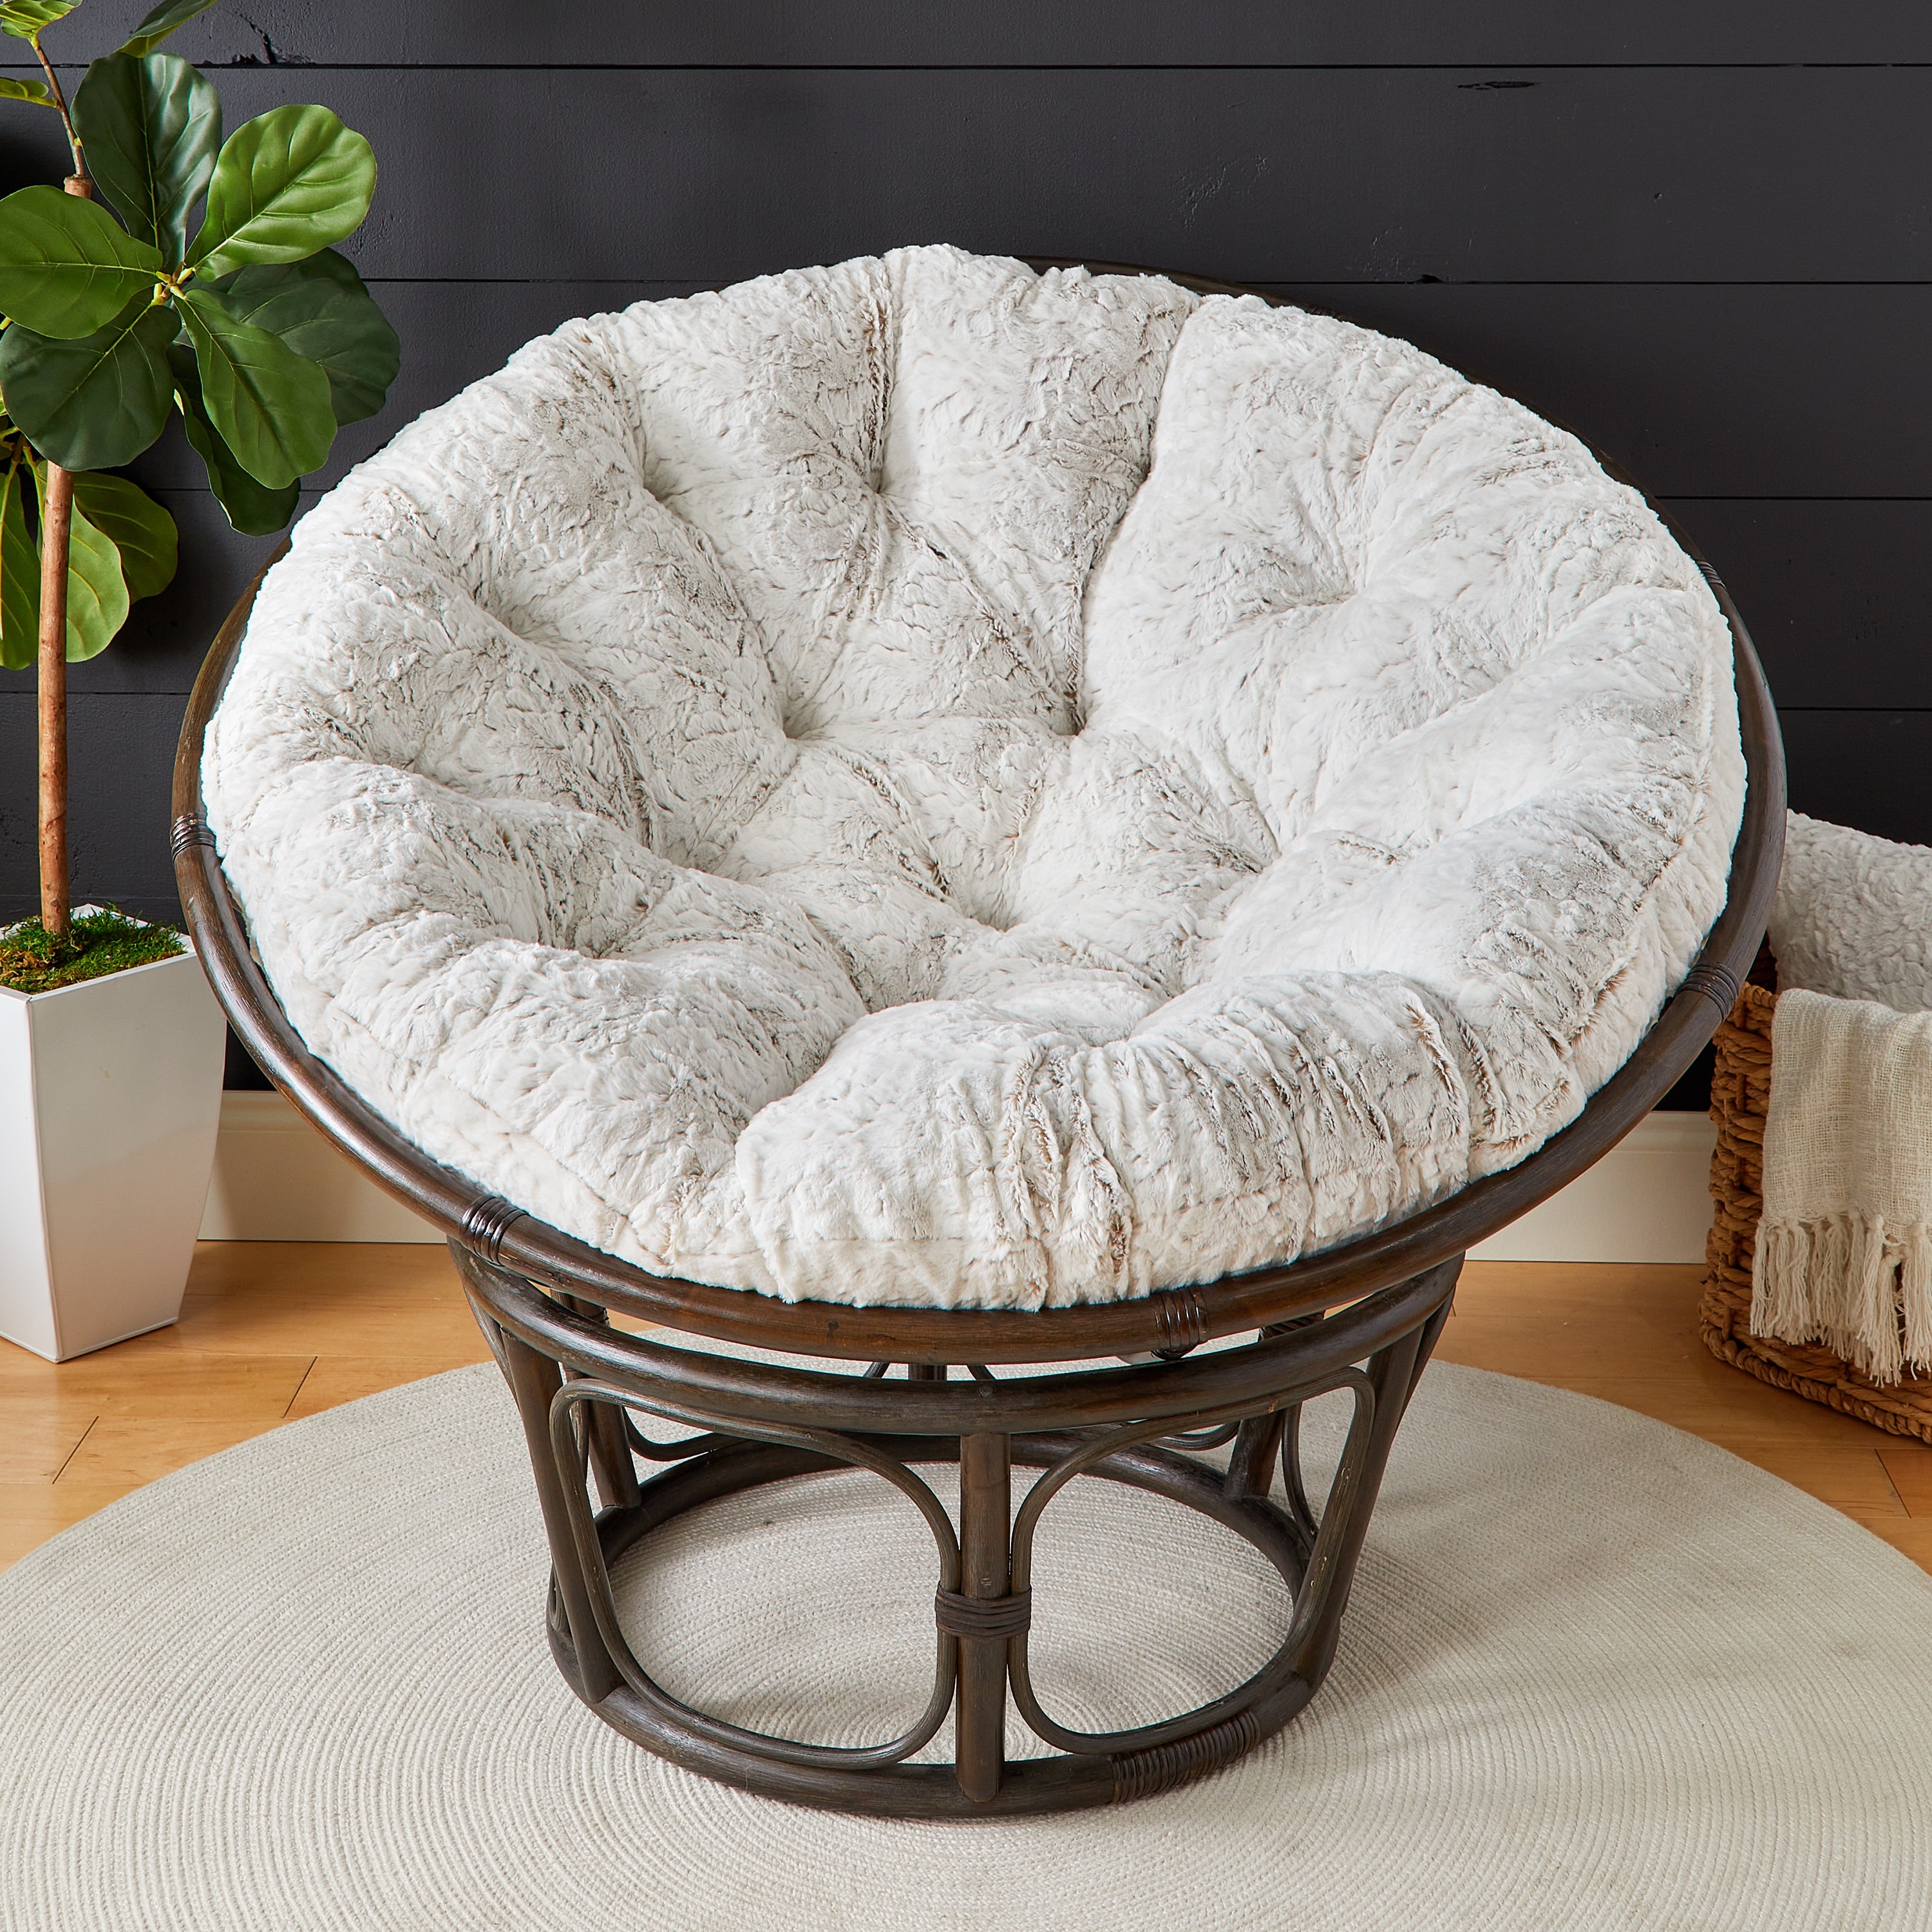 https://ak1.ostkcdn.com/images/products/is/images/direct/03e5ccb2b7f50a4a2f3511c560bfbb23f7d31f3c/Humble-%2B-Haute-Indoor-Faux-Fur-Papasan-Cushion-%28Cushion-Only%29.jpg